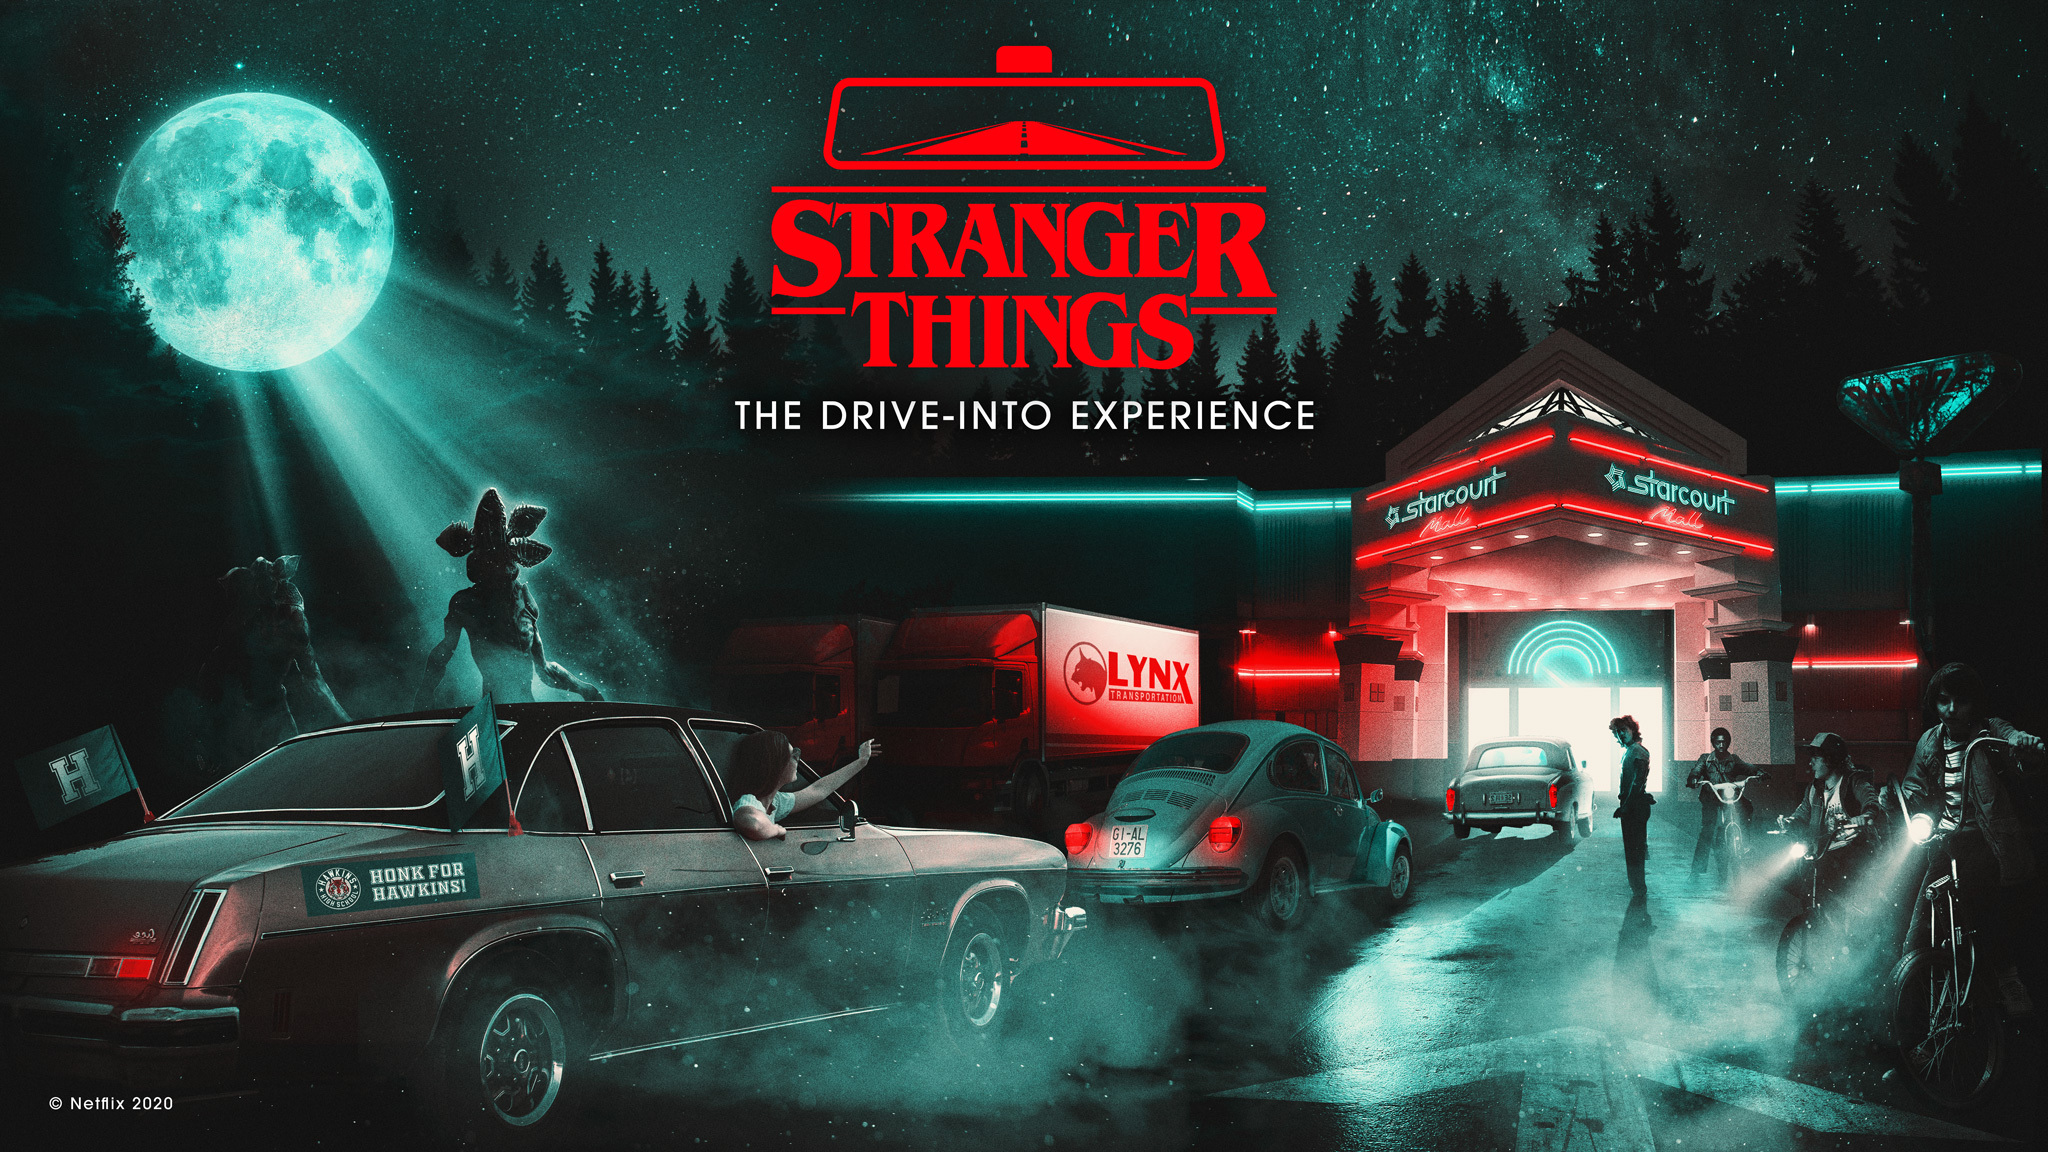 A 'Stranger Things' “Drive Into” Experience Is Bringing Hawkins To L.A. This October